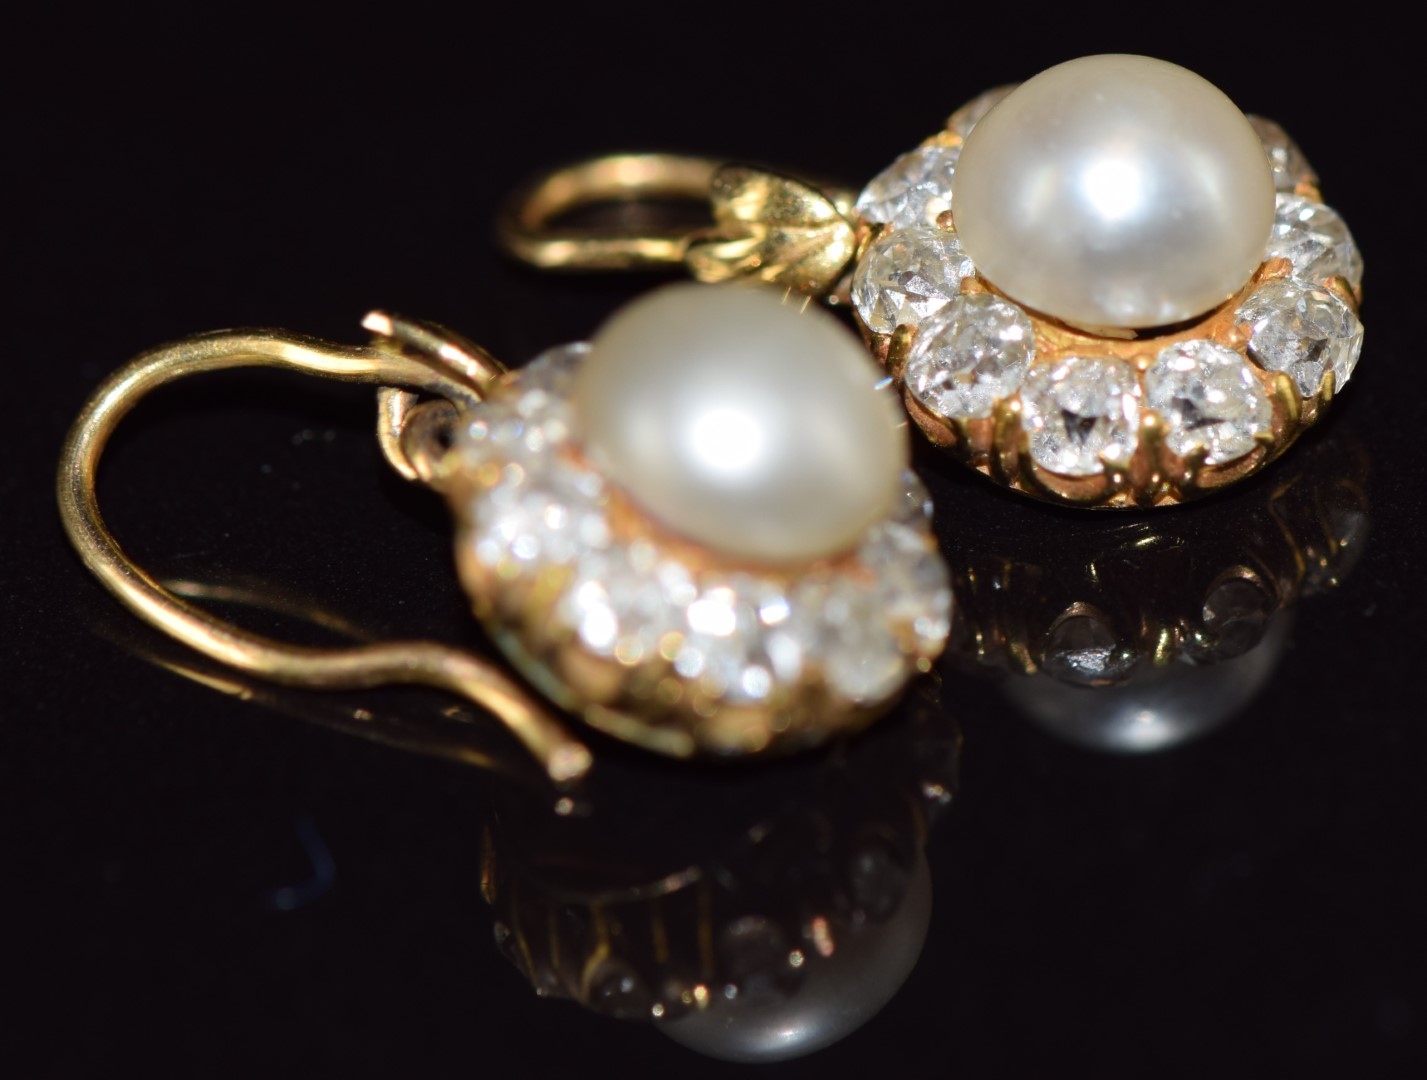 A pair of c1900 18ct gold earrings, each set with a natural pearl measuring 6.4mm surrounded by - Image 2 of 5